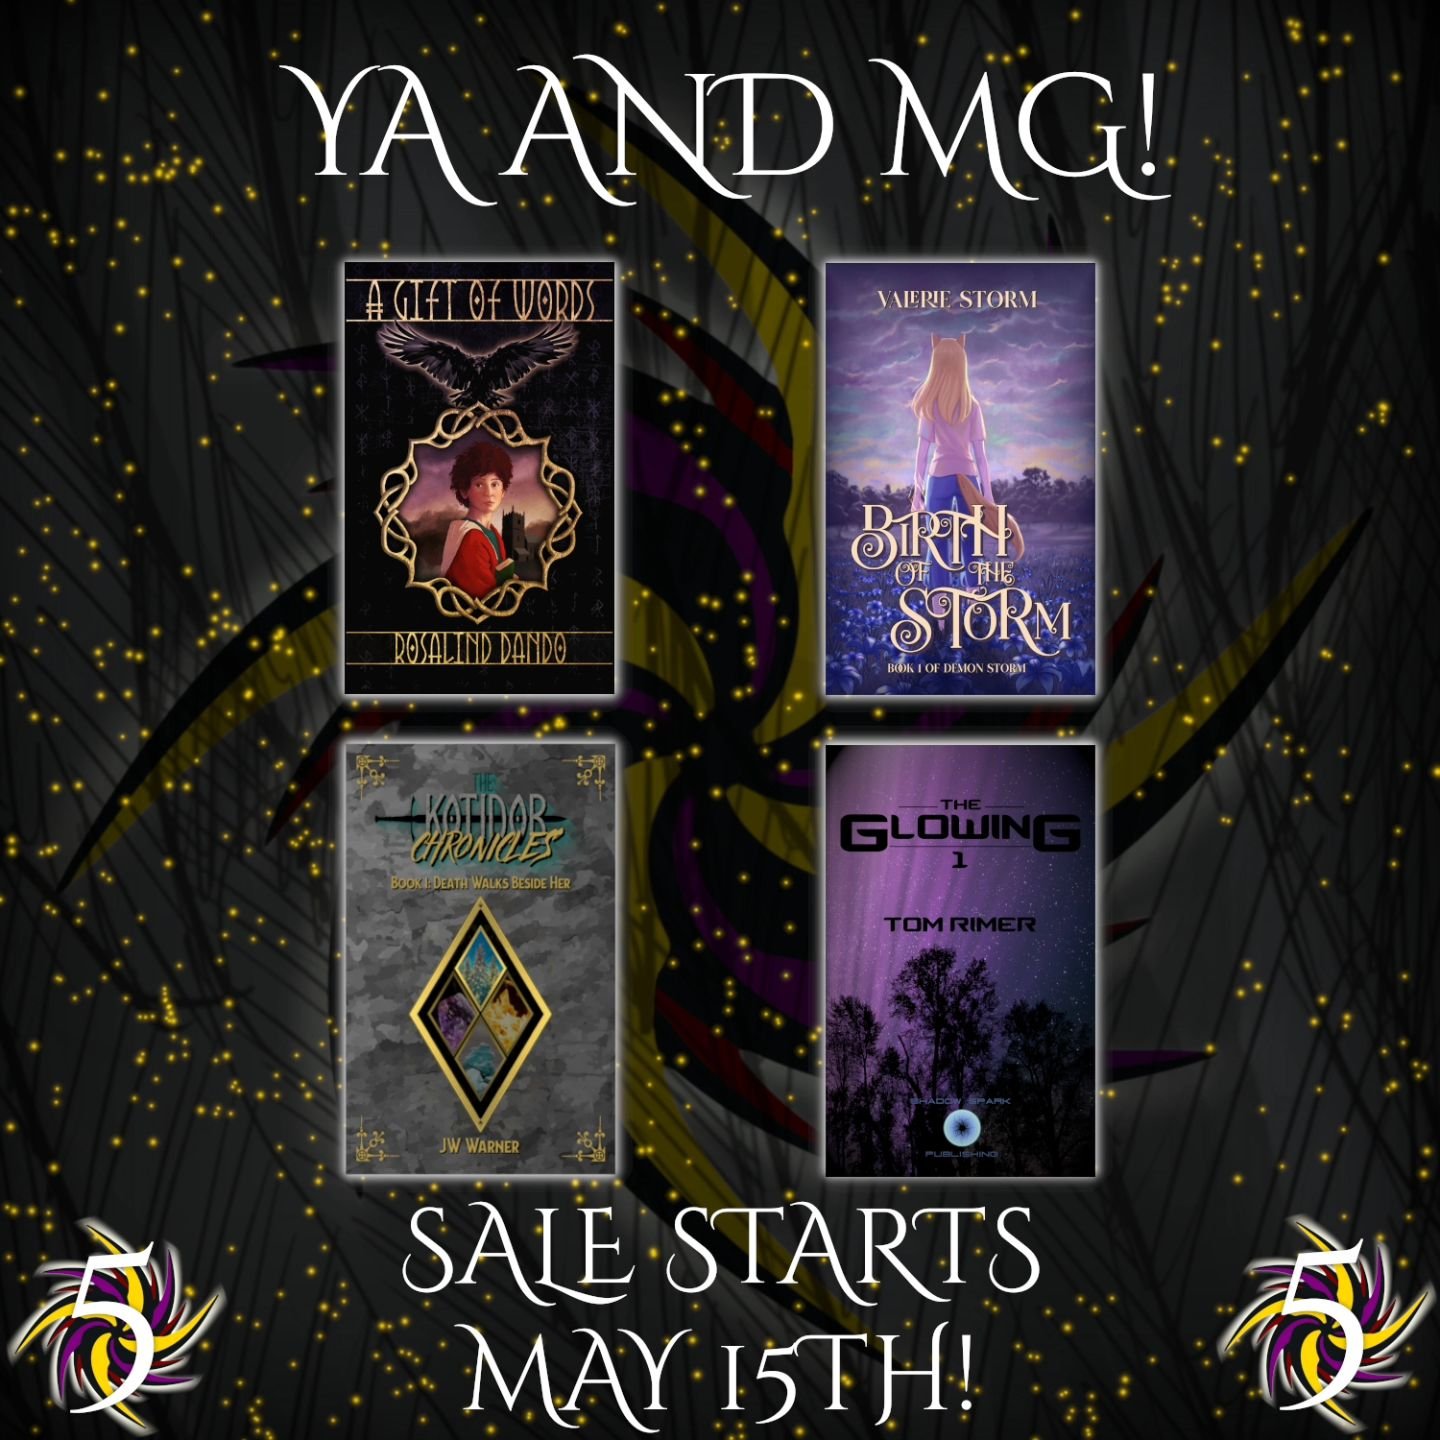 We have a robust Middle Grade and YA selection. Pick your faves and get ready for May 15th!

#sale #paperbacksale #booksale #ya #yabooks #mg #mgbooks #youngadult #youngadultbooks #middlegrade #middlegradebooks #bookstagram #readersofinsta #indiepubli